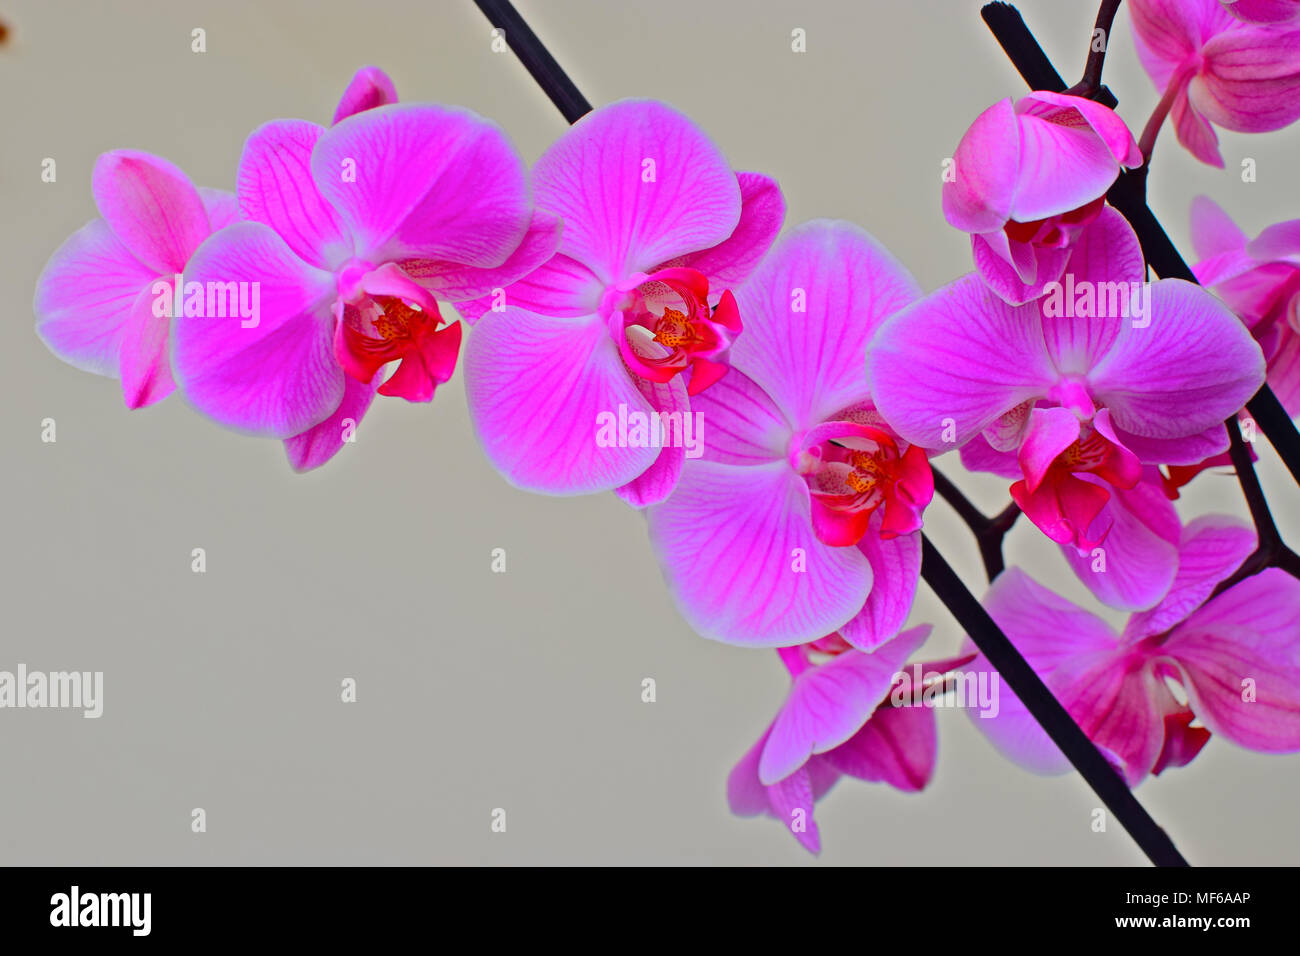 British-grown bright pink Phalaenopsis orchid against a plain grey background Stock Photo